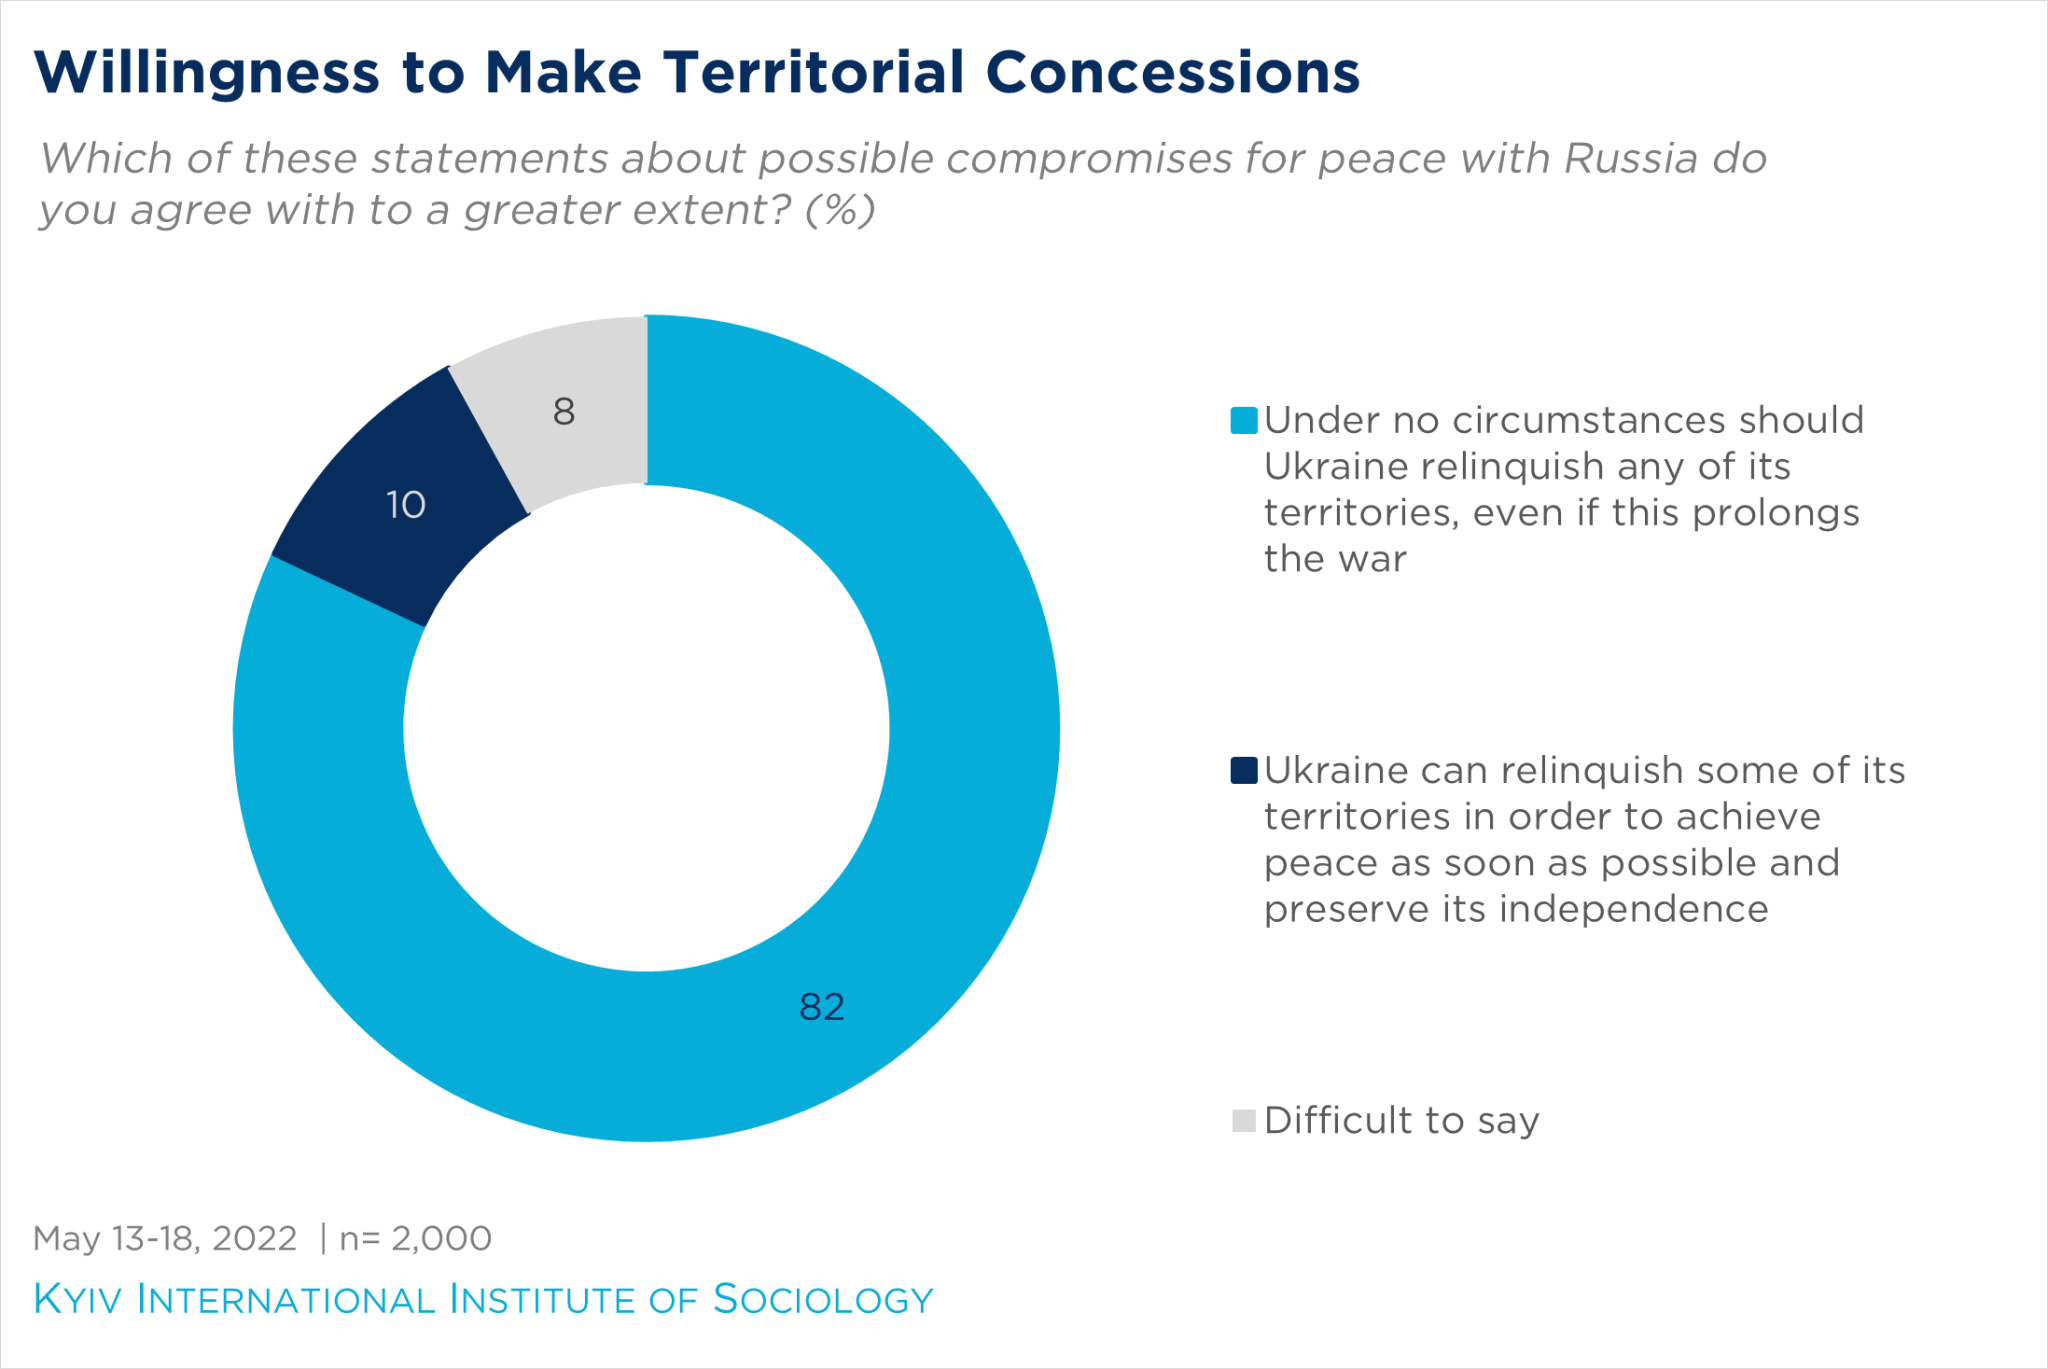 Graph showing public opinion on possible compromises for peace with Russia